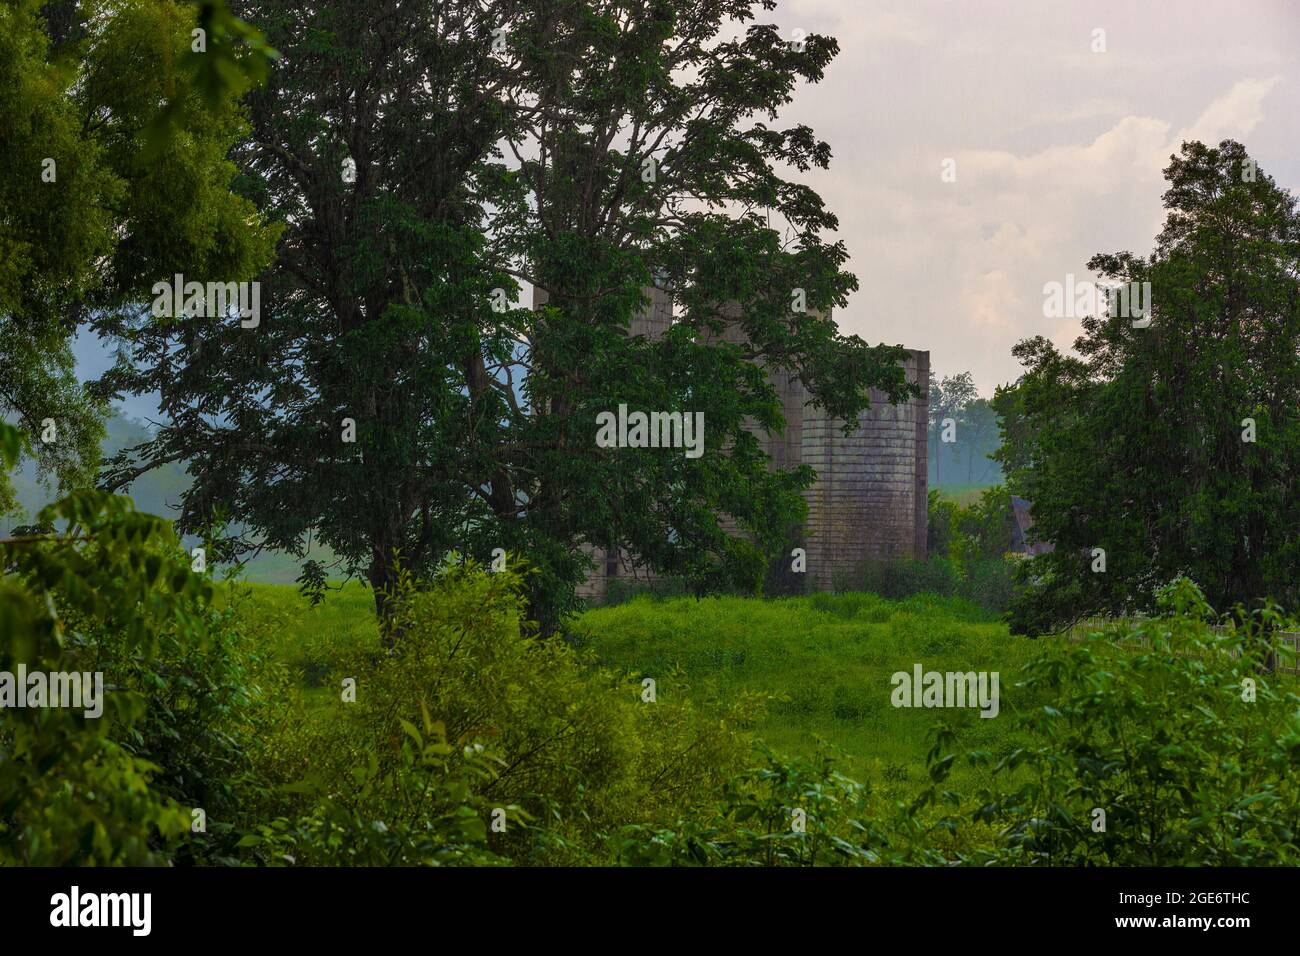 Rain falls on this lush landscape of plants and trees with three silo towers. Stock Photo